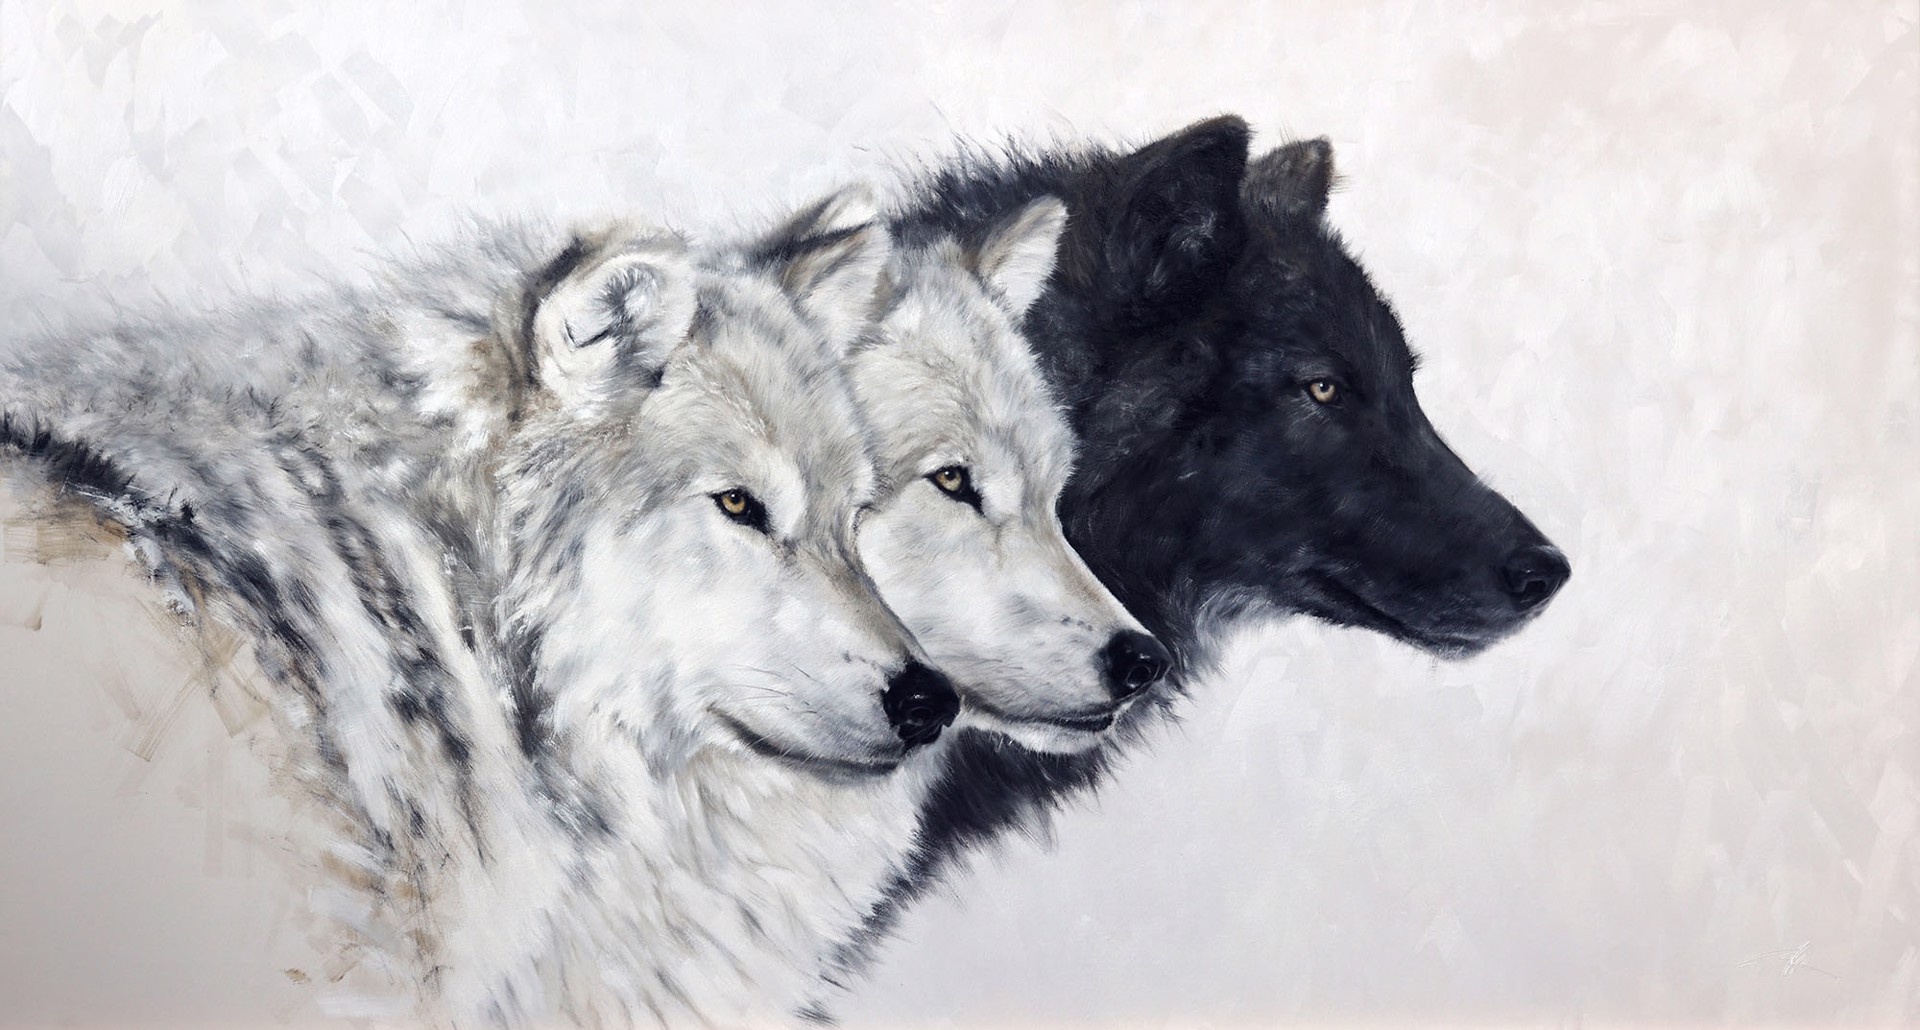 Original Oil Painting By Doyle Hostetler Featuring Two Gray Wolves And One Black Wolf In A Line From Side Profile